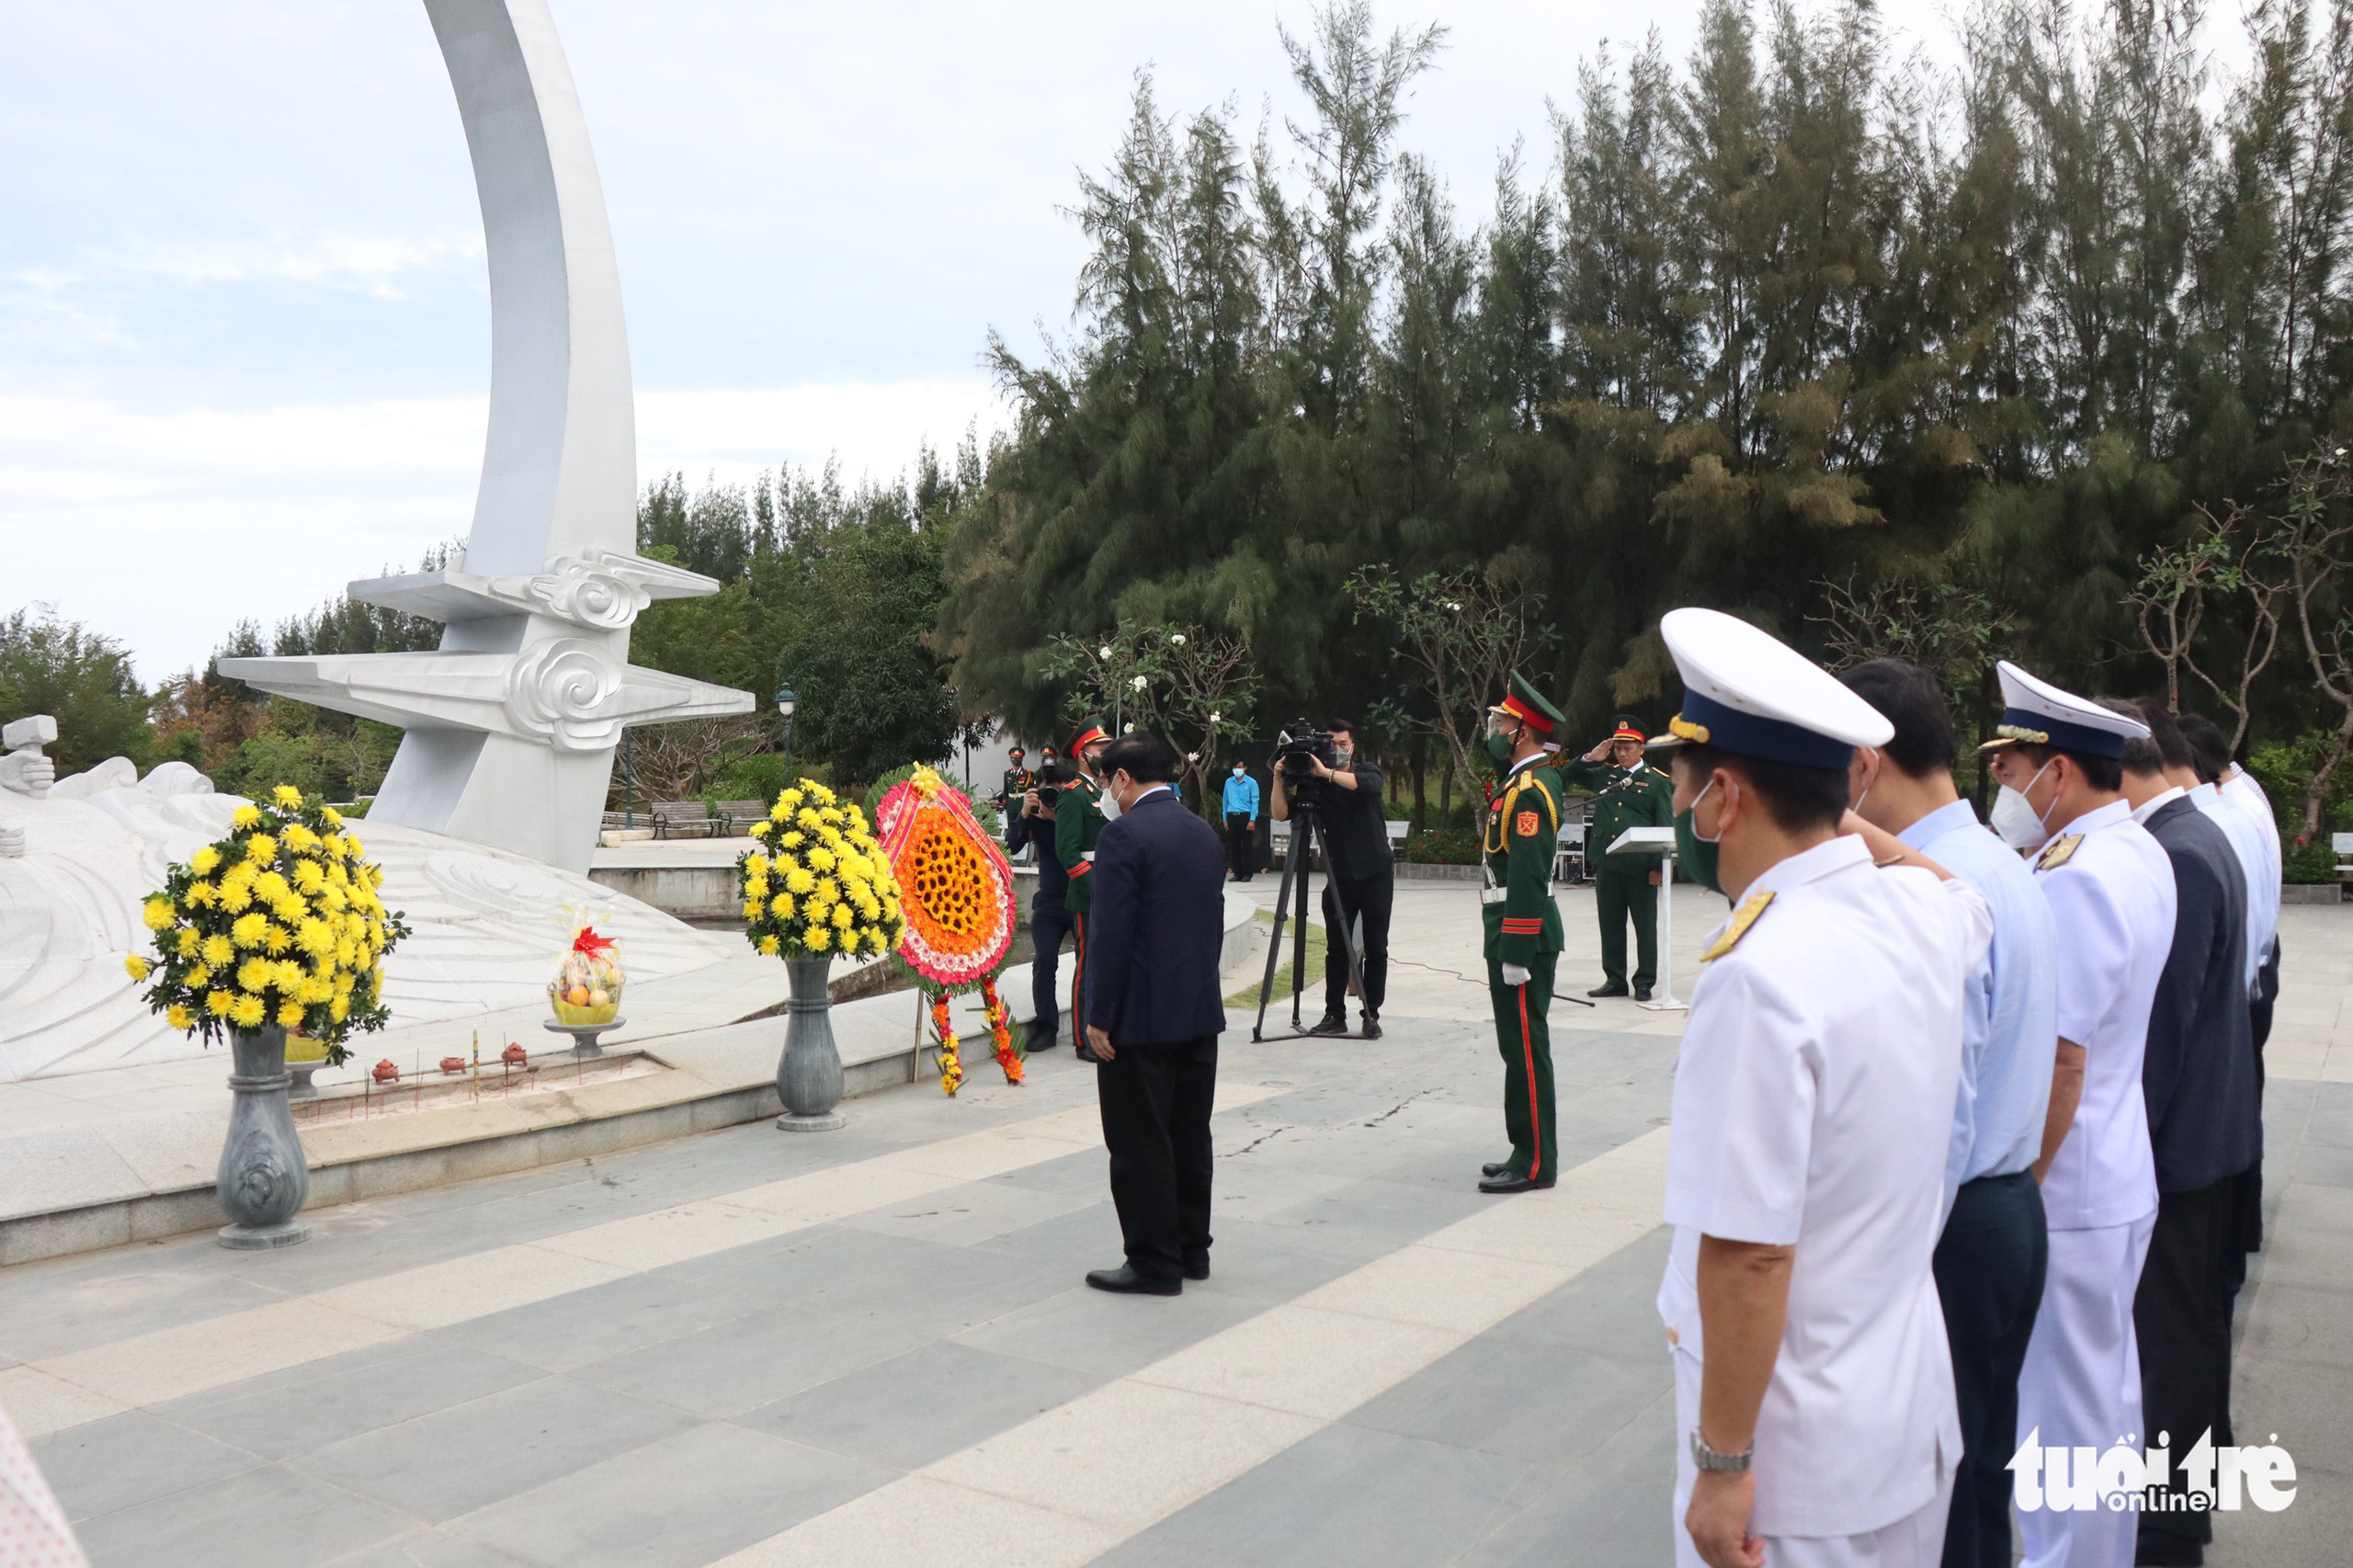 Prime Minister Pham Minh Chinh pays tribute to the fallen soldiers at the Gac Ma memorial complex in Khanh Hoa Province, March 12, 2022. Photo: X.T. / Tuoi Tre